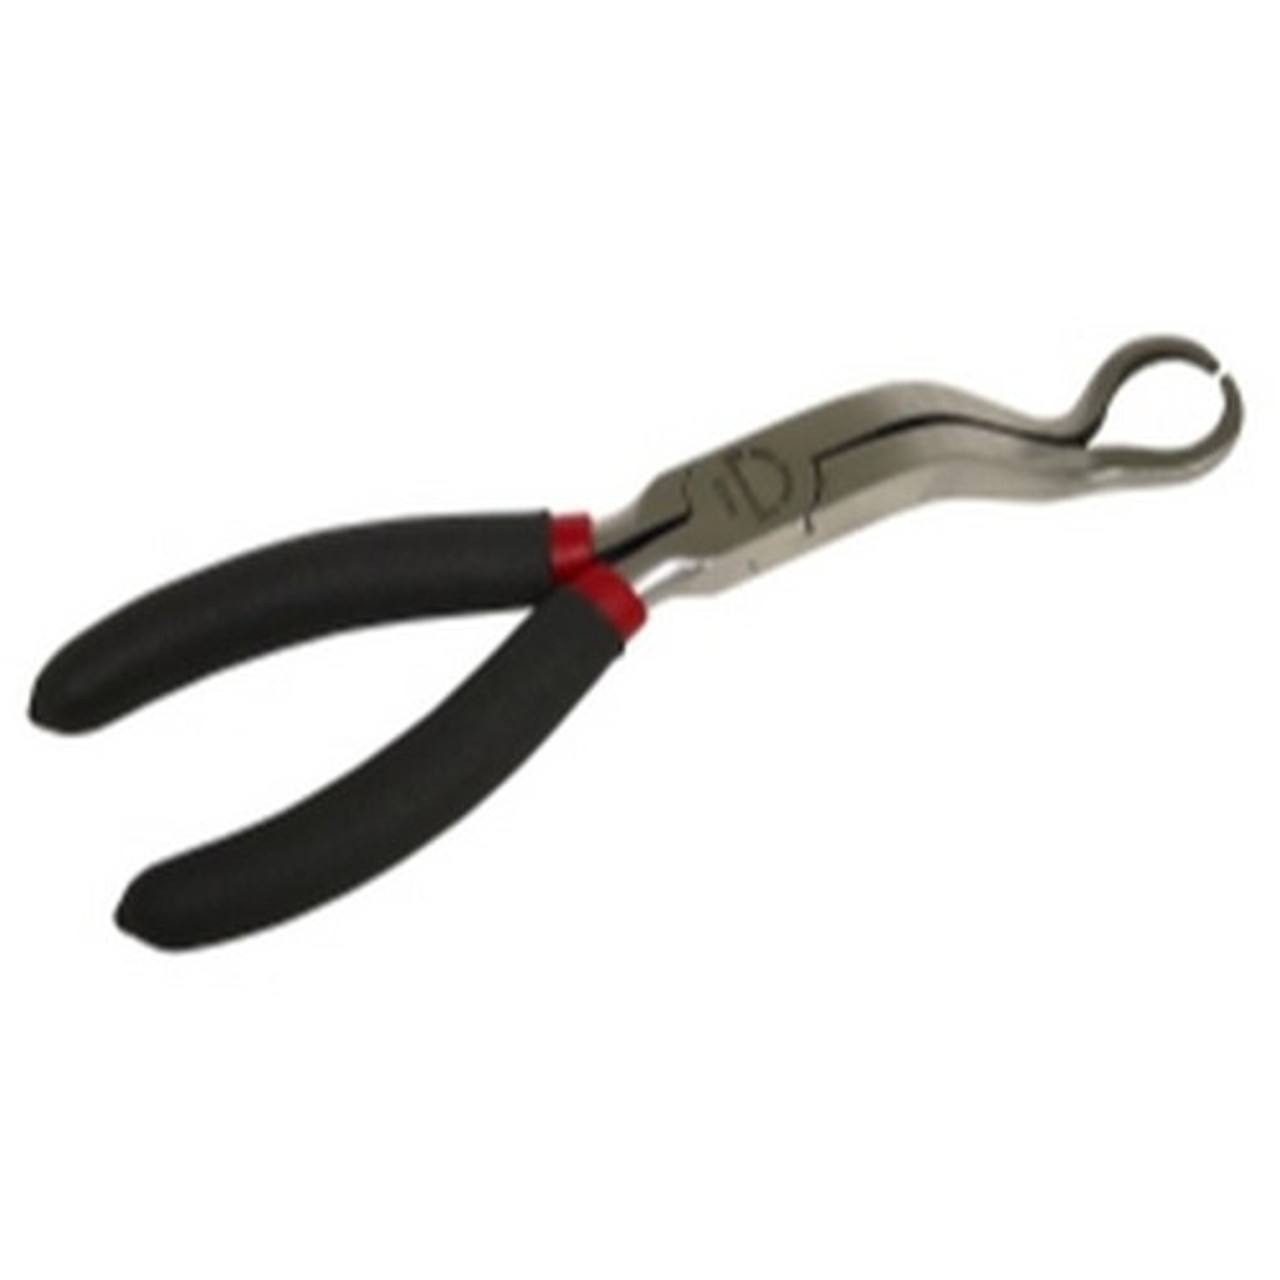 Lisle Spark Plug Boot Removal Tool by Lisle Specialty Tools